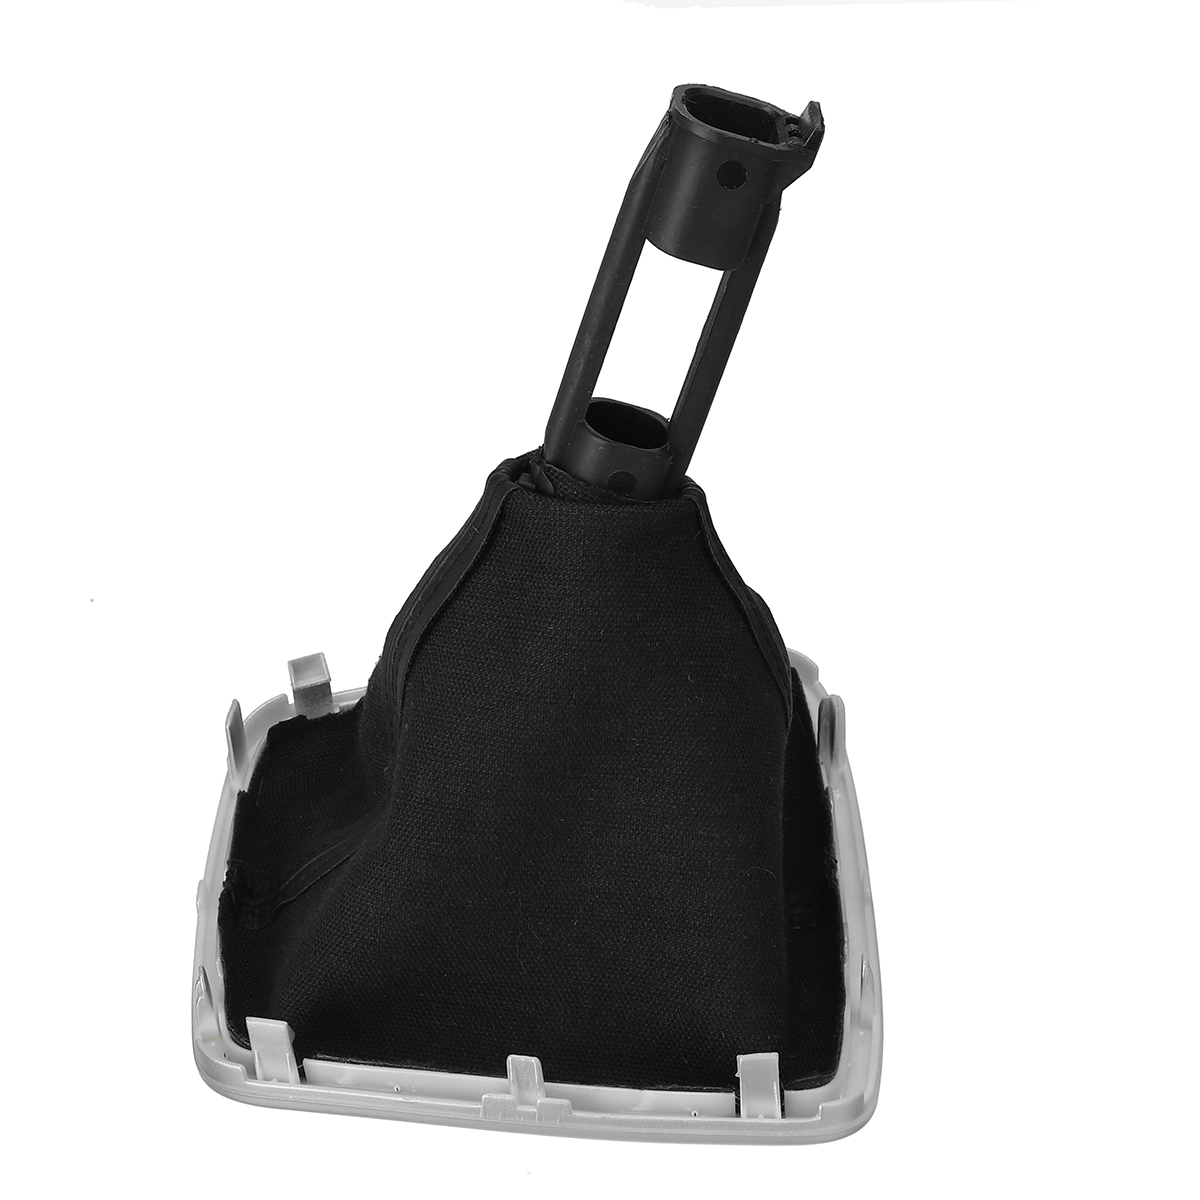 Manual Gear Stick Shift Knob Gaiter Boot Cover PU Leather for Renault for Laguna 3 Mk3 2007-2014